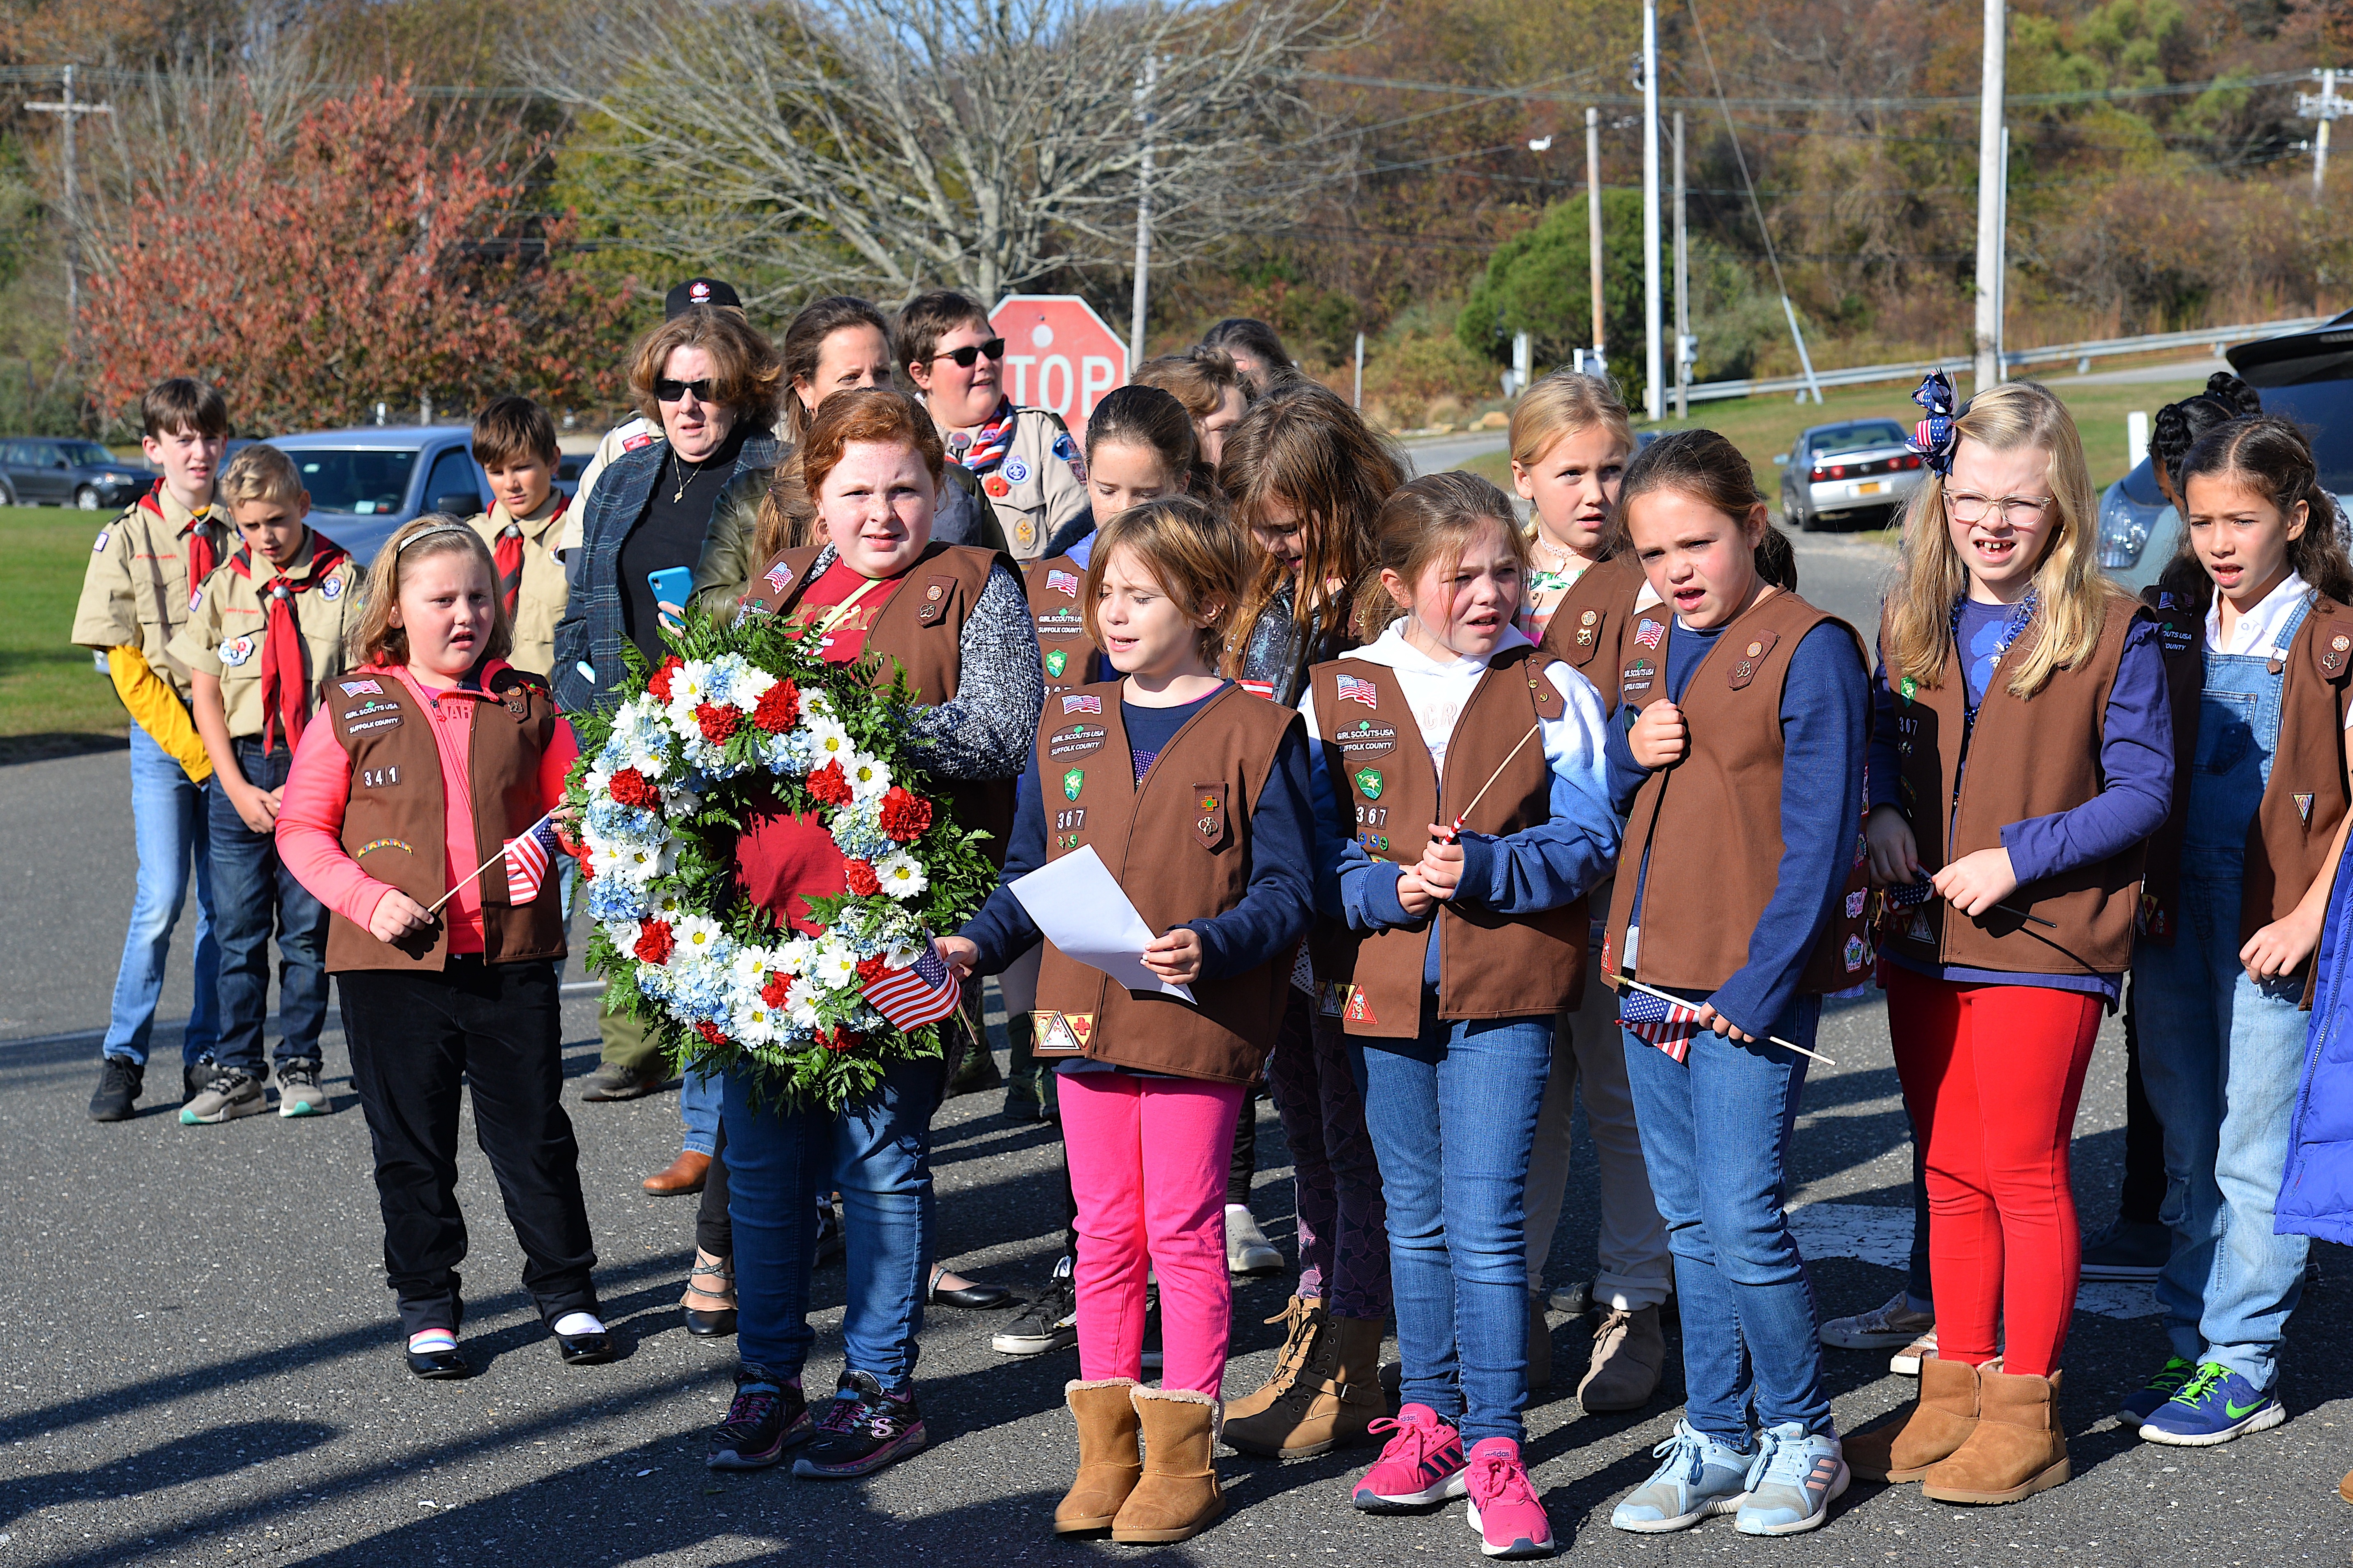 A Veterans Day ceremony took place at the Montauk Playhouse on Monday, which included participation from the local Boy Scouts and Girl Scouts. KYRIL BROMLEY